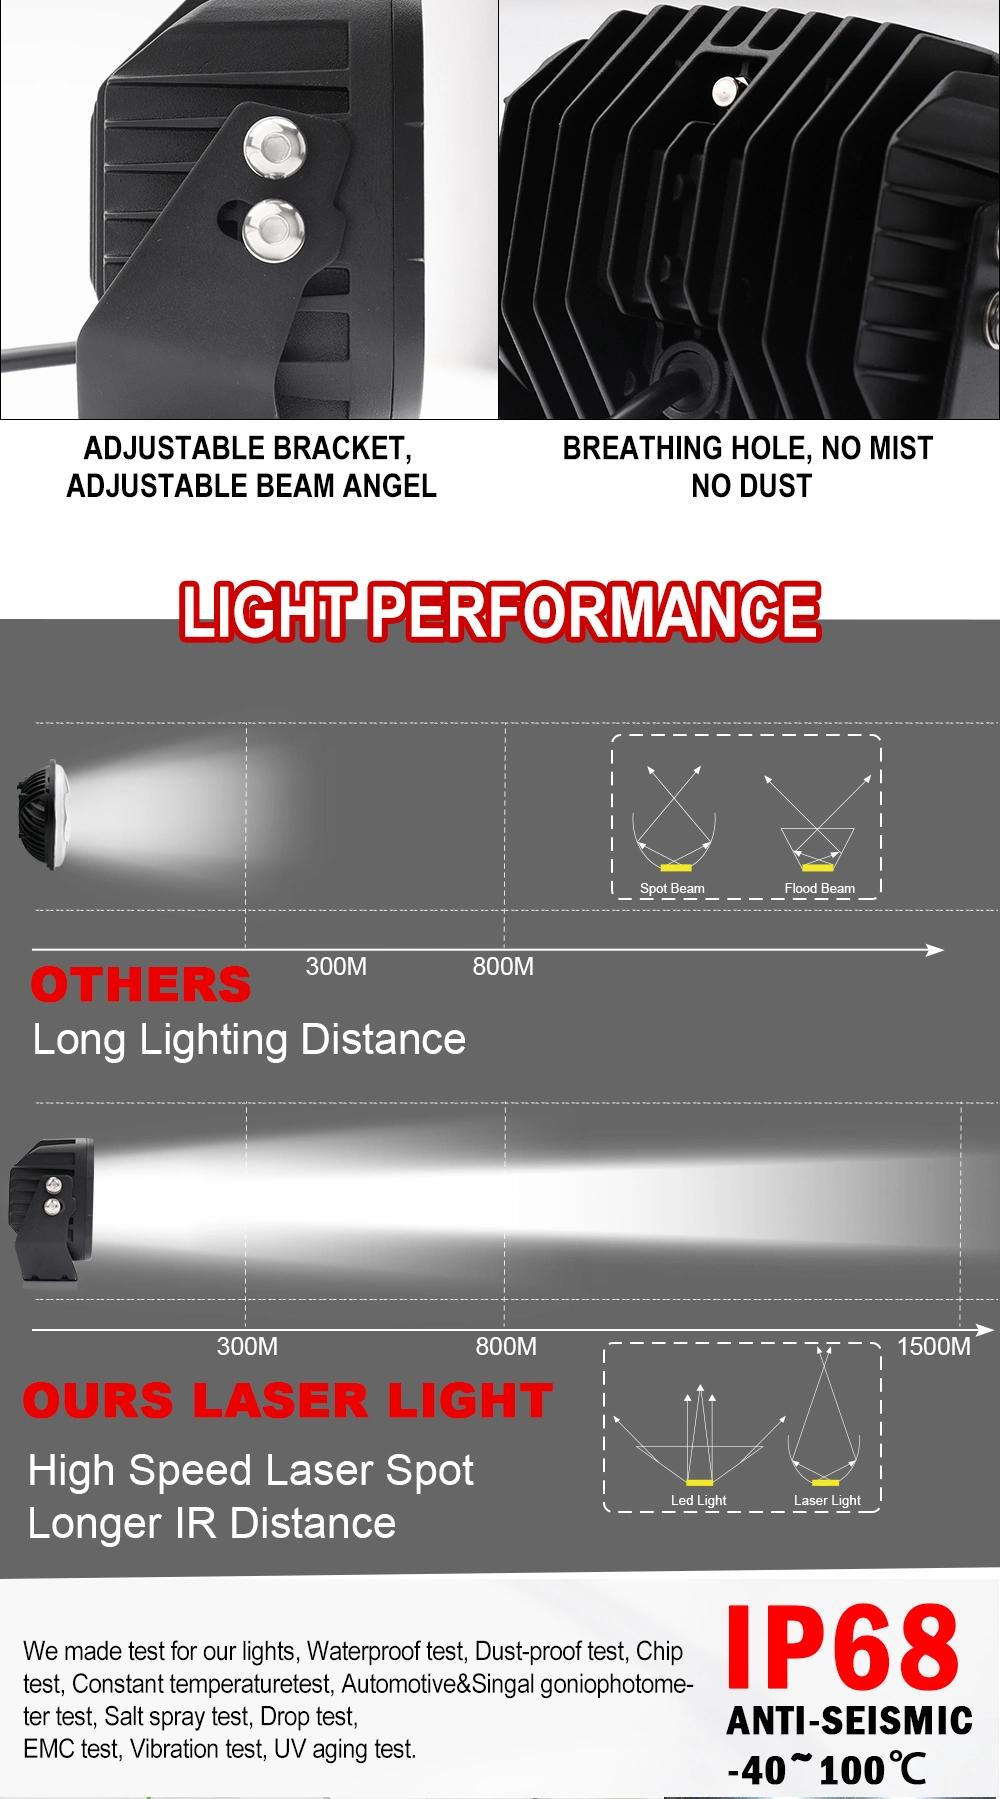 Hot Sale High Power CREE Super Bright Round 4X4 Truck Offroad Laser LED Driving Light, Motorcycle 5 Inch 50W Laser LED Work Light for off Road Jeep UTV ATV